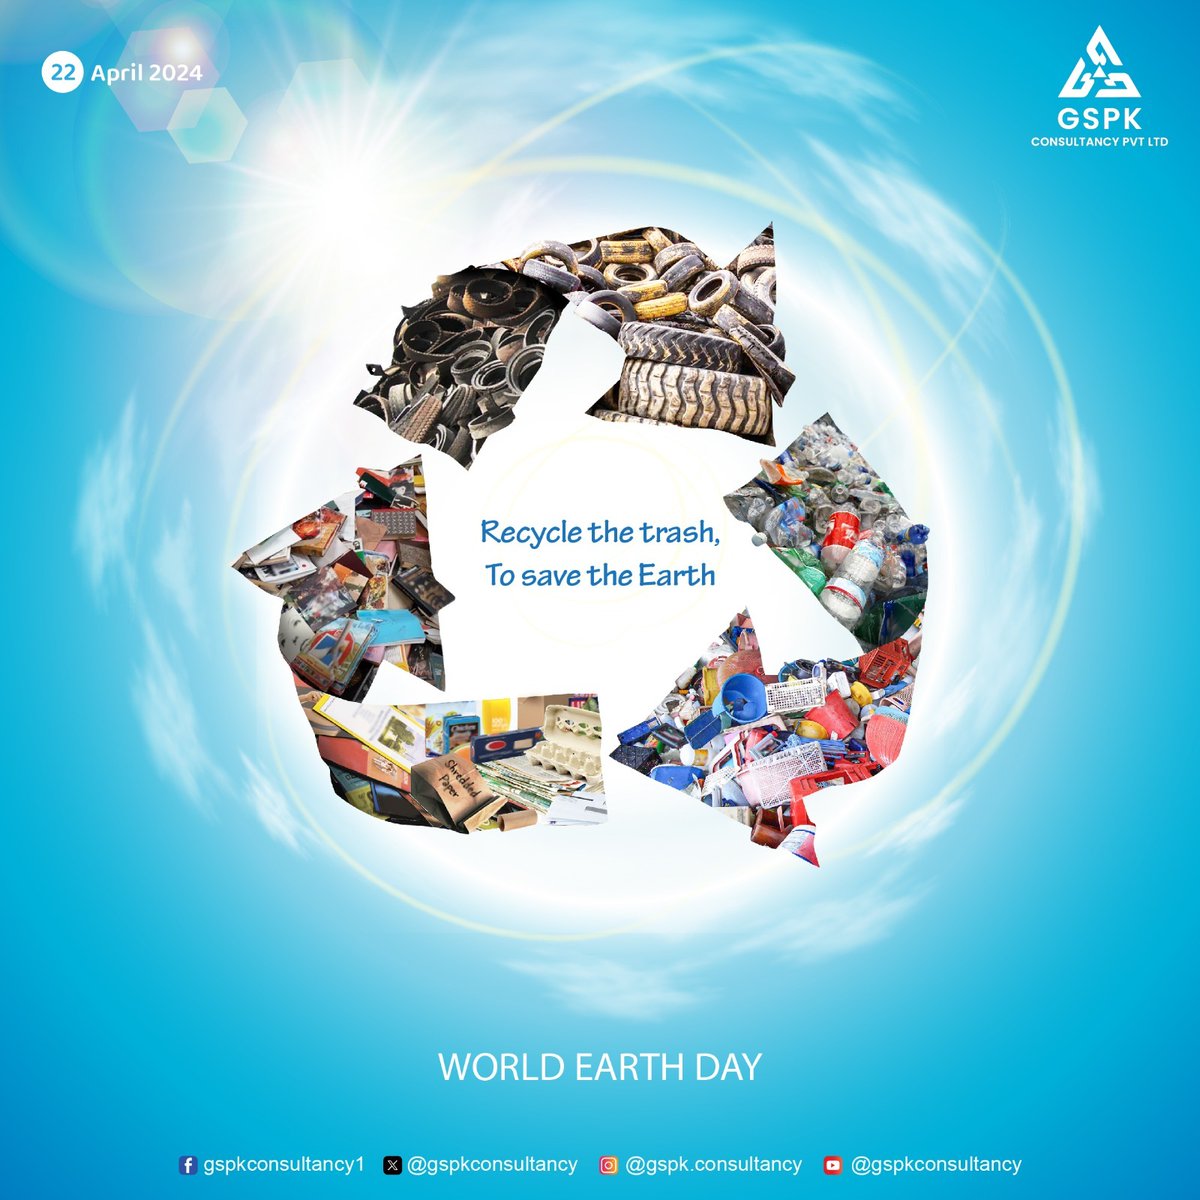 reduce, reuse and recycle
rubber, plastic and paper trash
to save the Earth
#saveearth #worldearthday #creative #stoppollution #EarthDay2024 #Earth
#GSPK #GspkConsultancy #socialmediaagency #digitalmarketing #digitalmedia #socialmediamarketing #socialmediastrategy